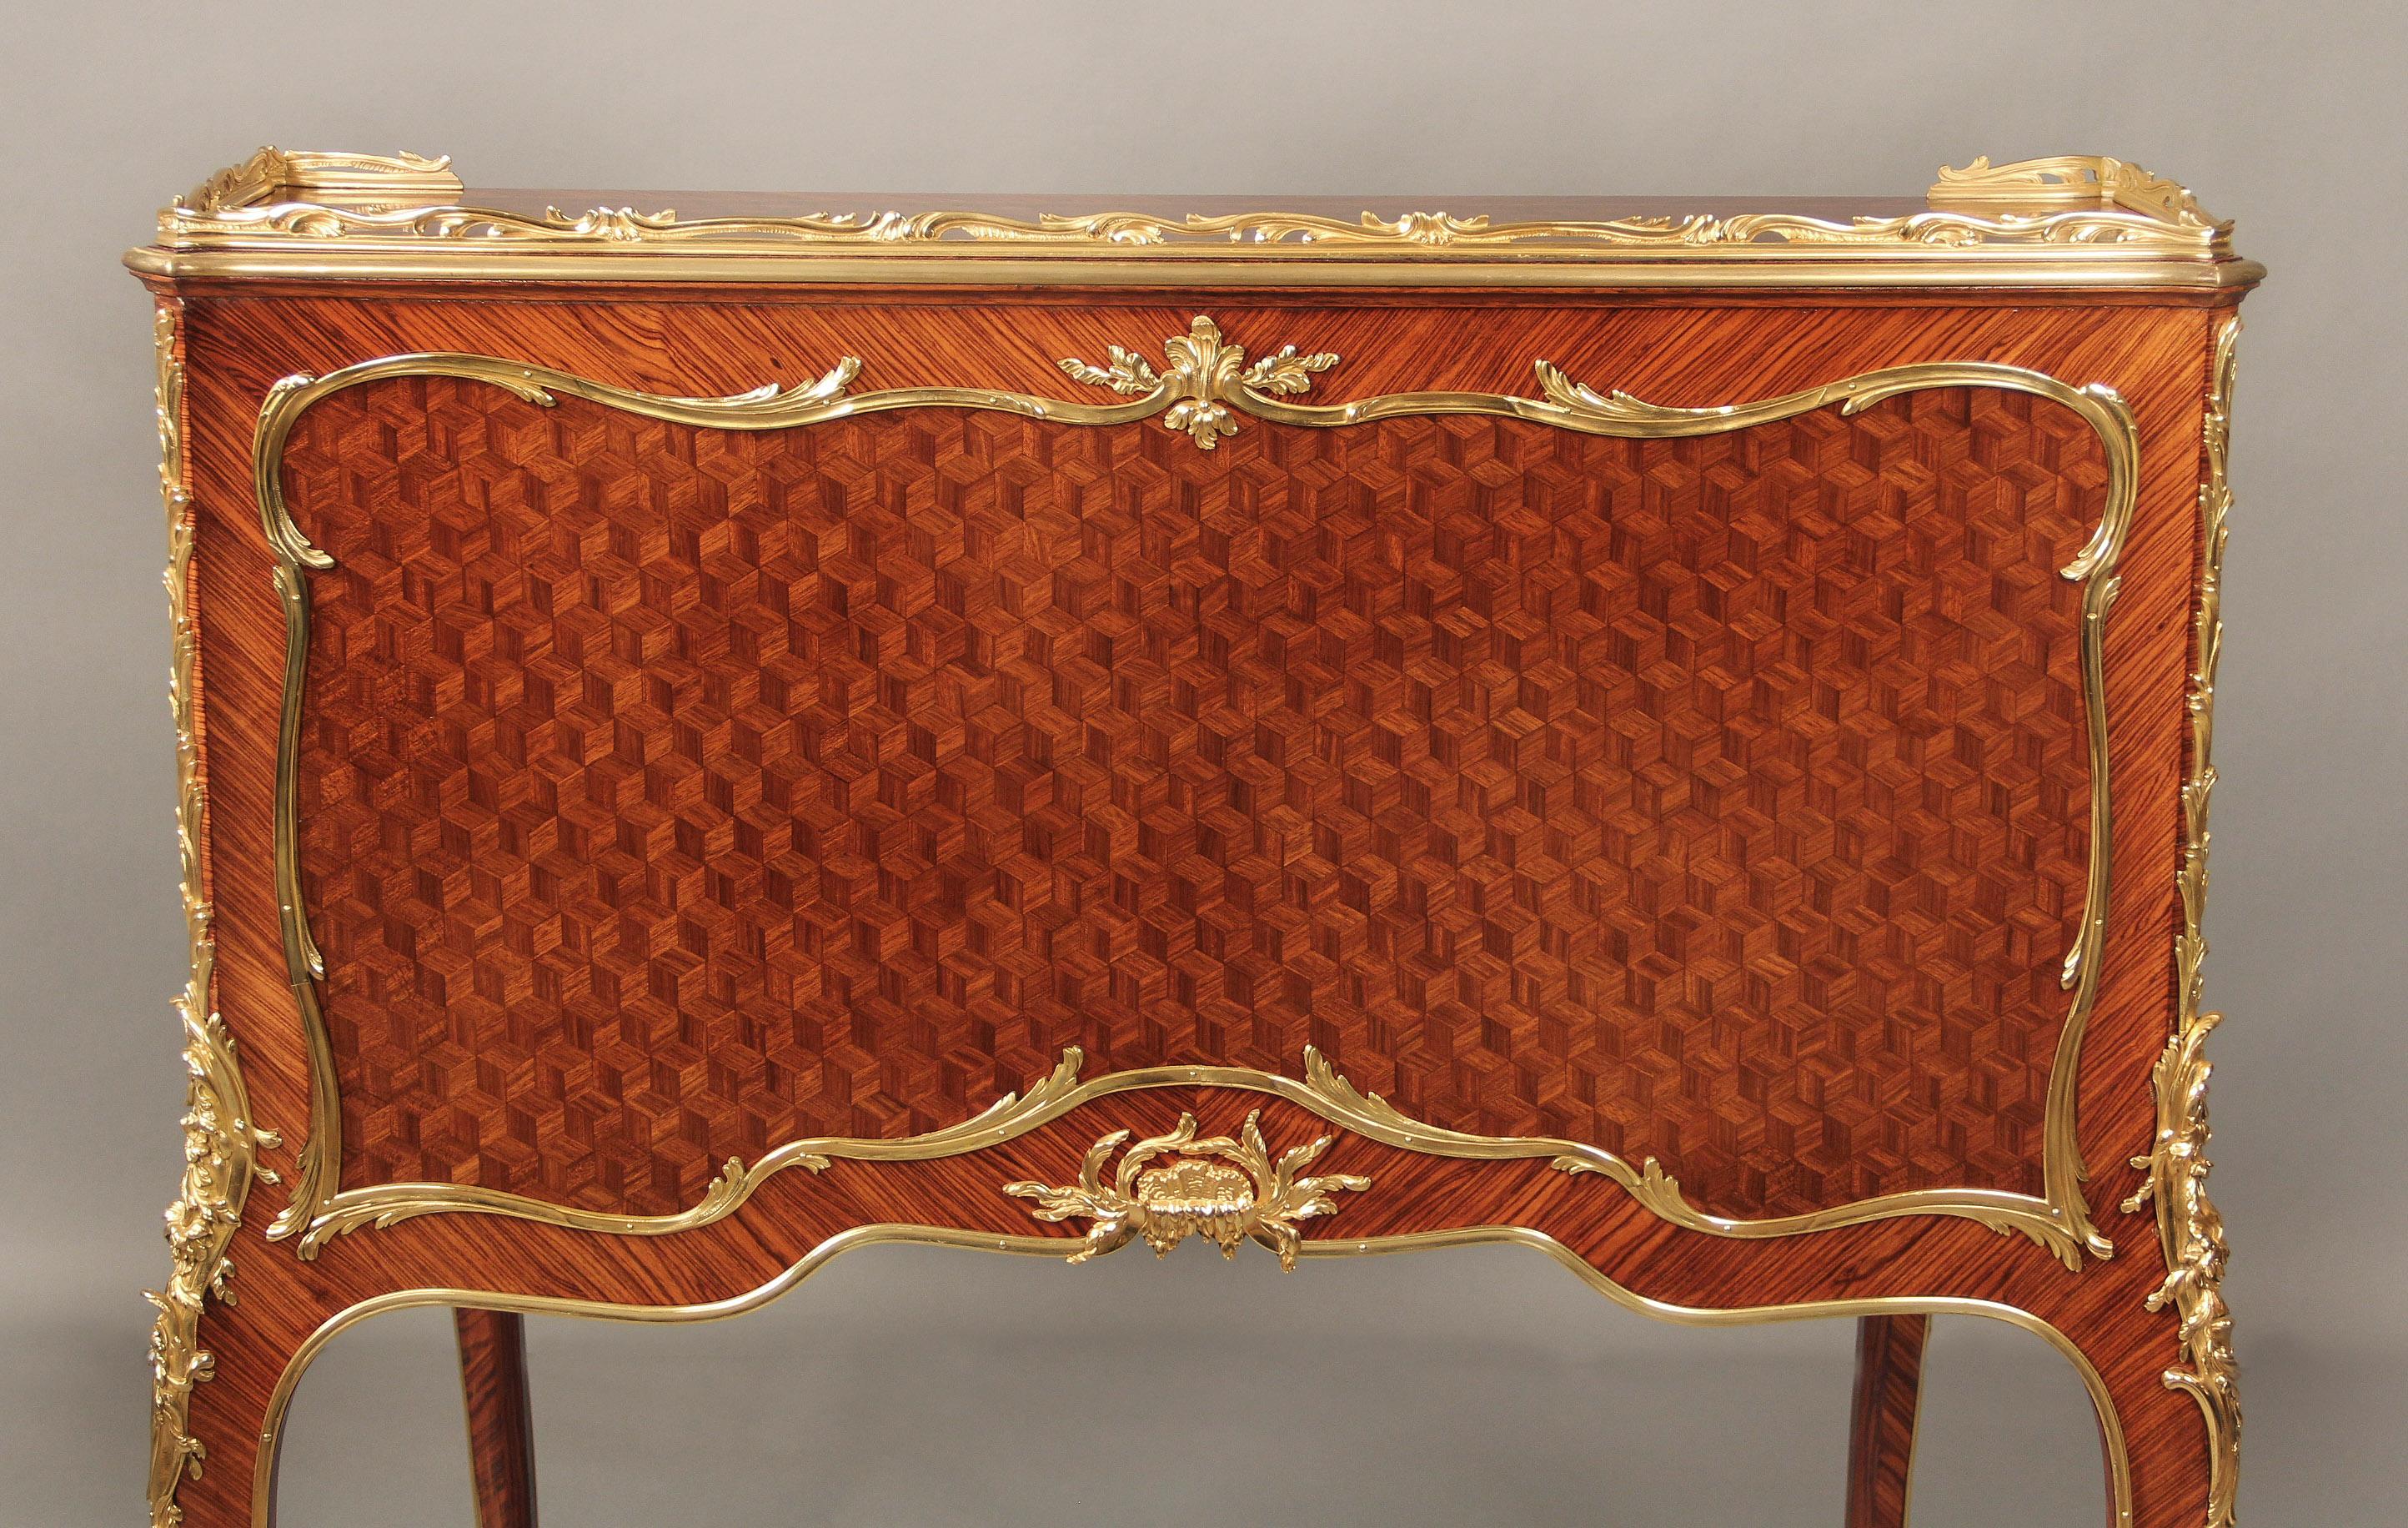 Bronze Late 19th Century Marquetry and Parquetry Bureau a Cylindre by François Linke For Sale